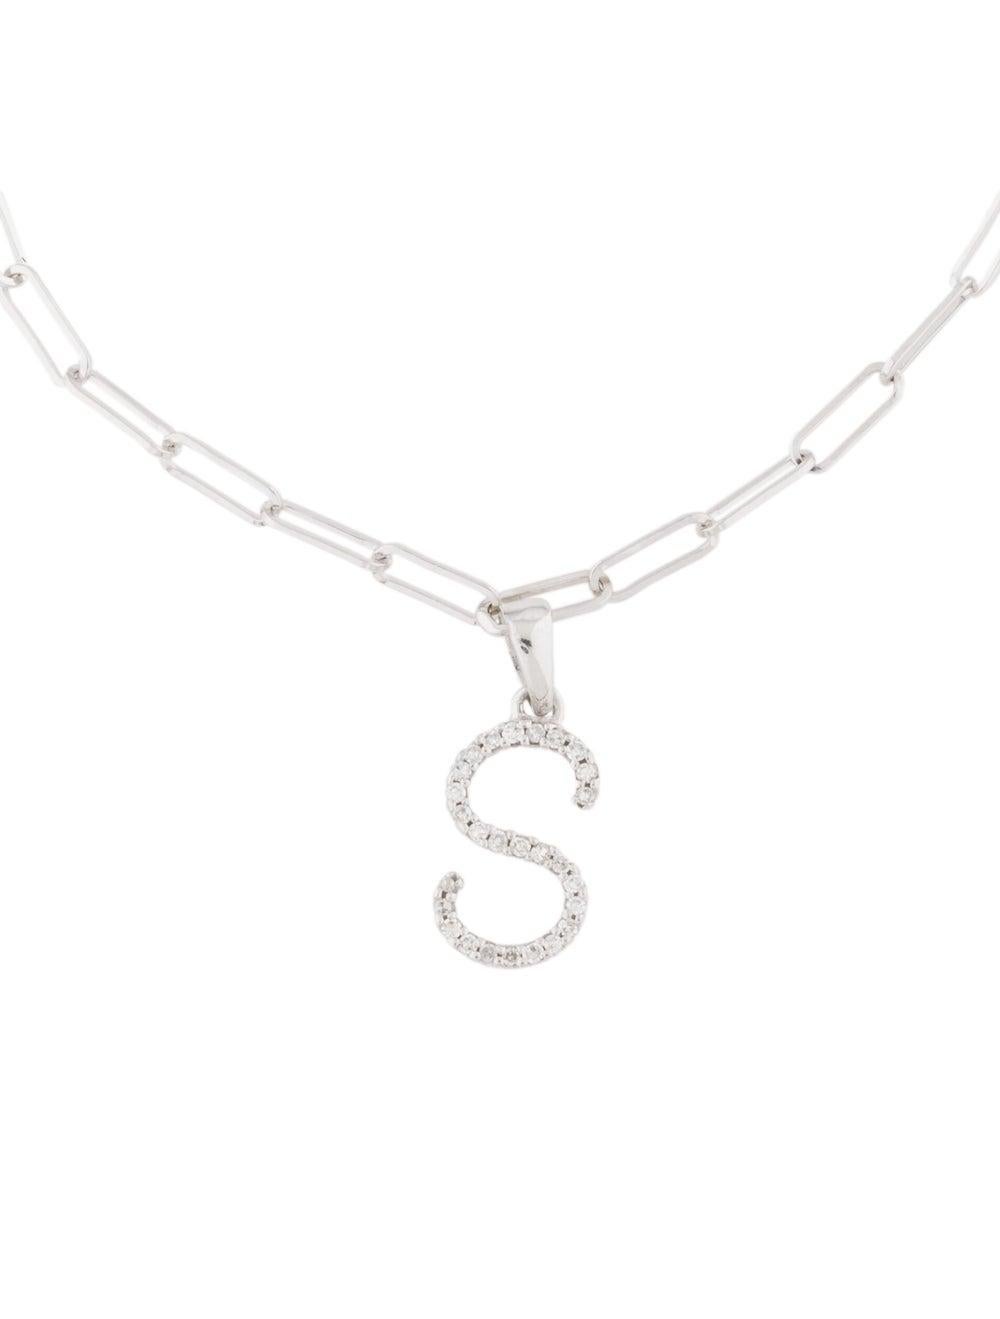 This is an adorable Initial Letter Bracelet crafted of 14k White Gold with approximately 0.05 ct. Round Sparkly Diamonds. Diamond Color and Clarity GH-SI1-SI2. Comes on an 7